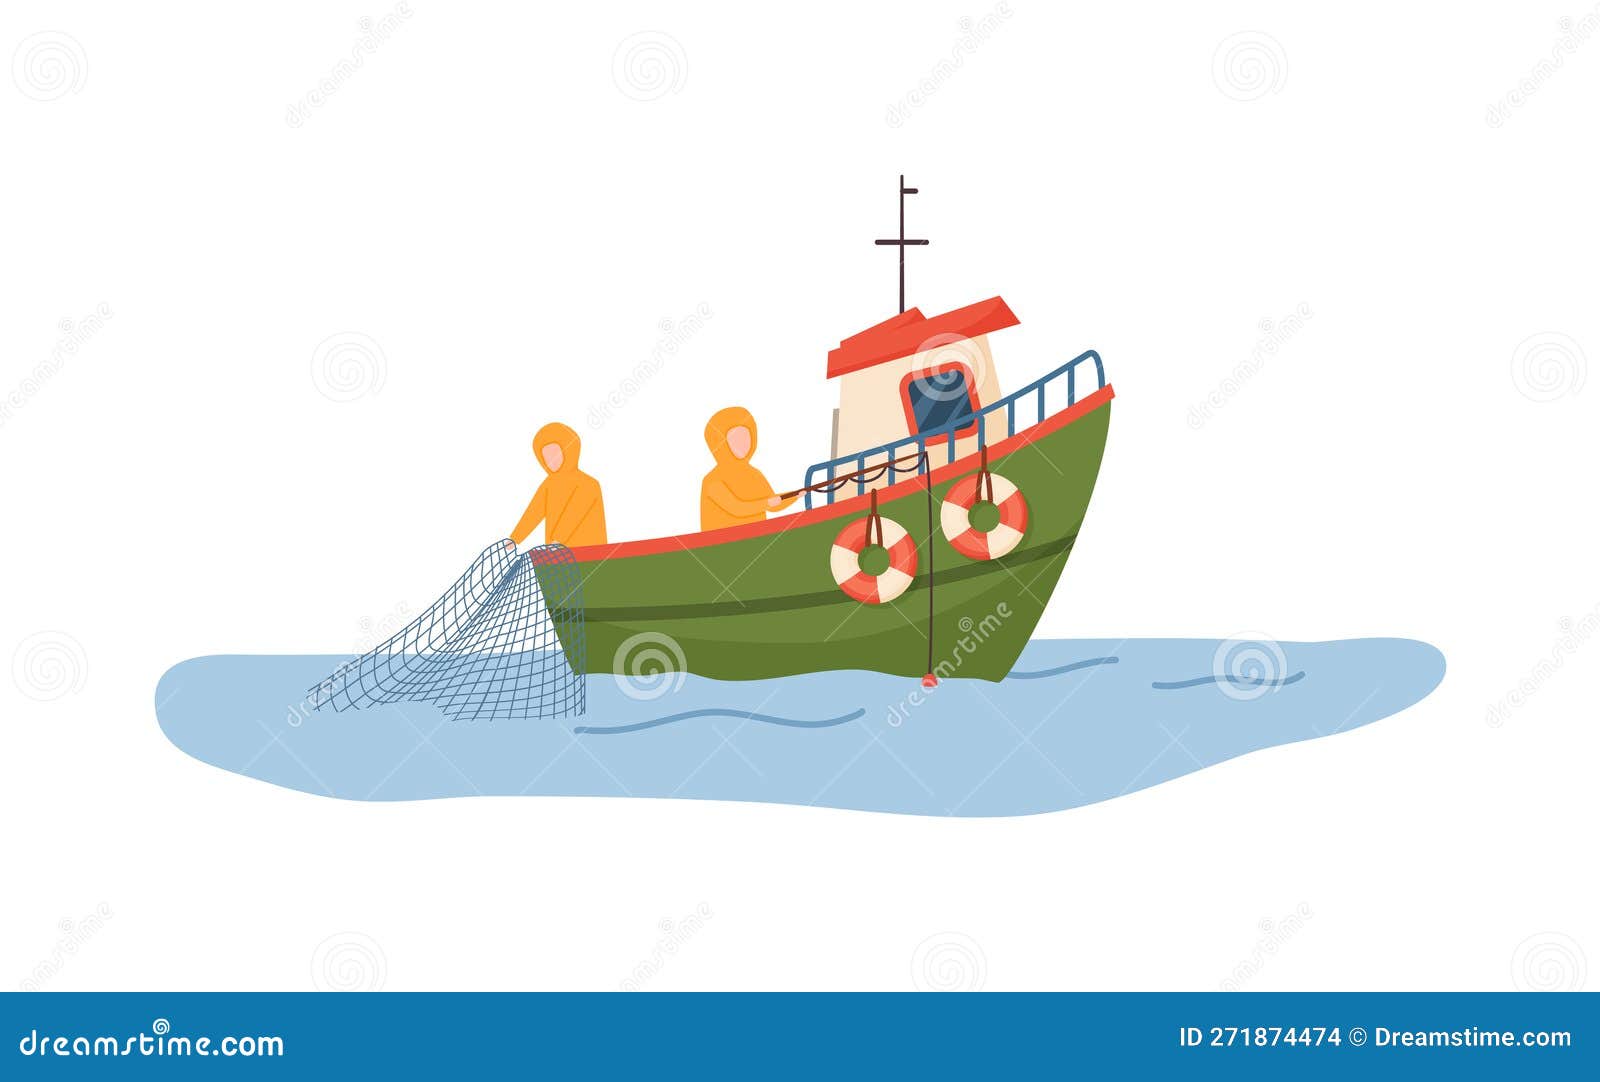 https://thumbs.dreamstime.com/z/fishermen-sea-catch-fish-nets-boat-flat-vector-isolated-fishermen-sea-catch-fish-nets-boat-271874474.jpg